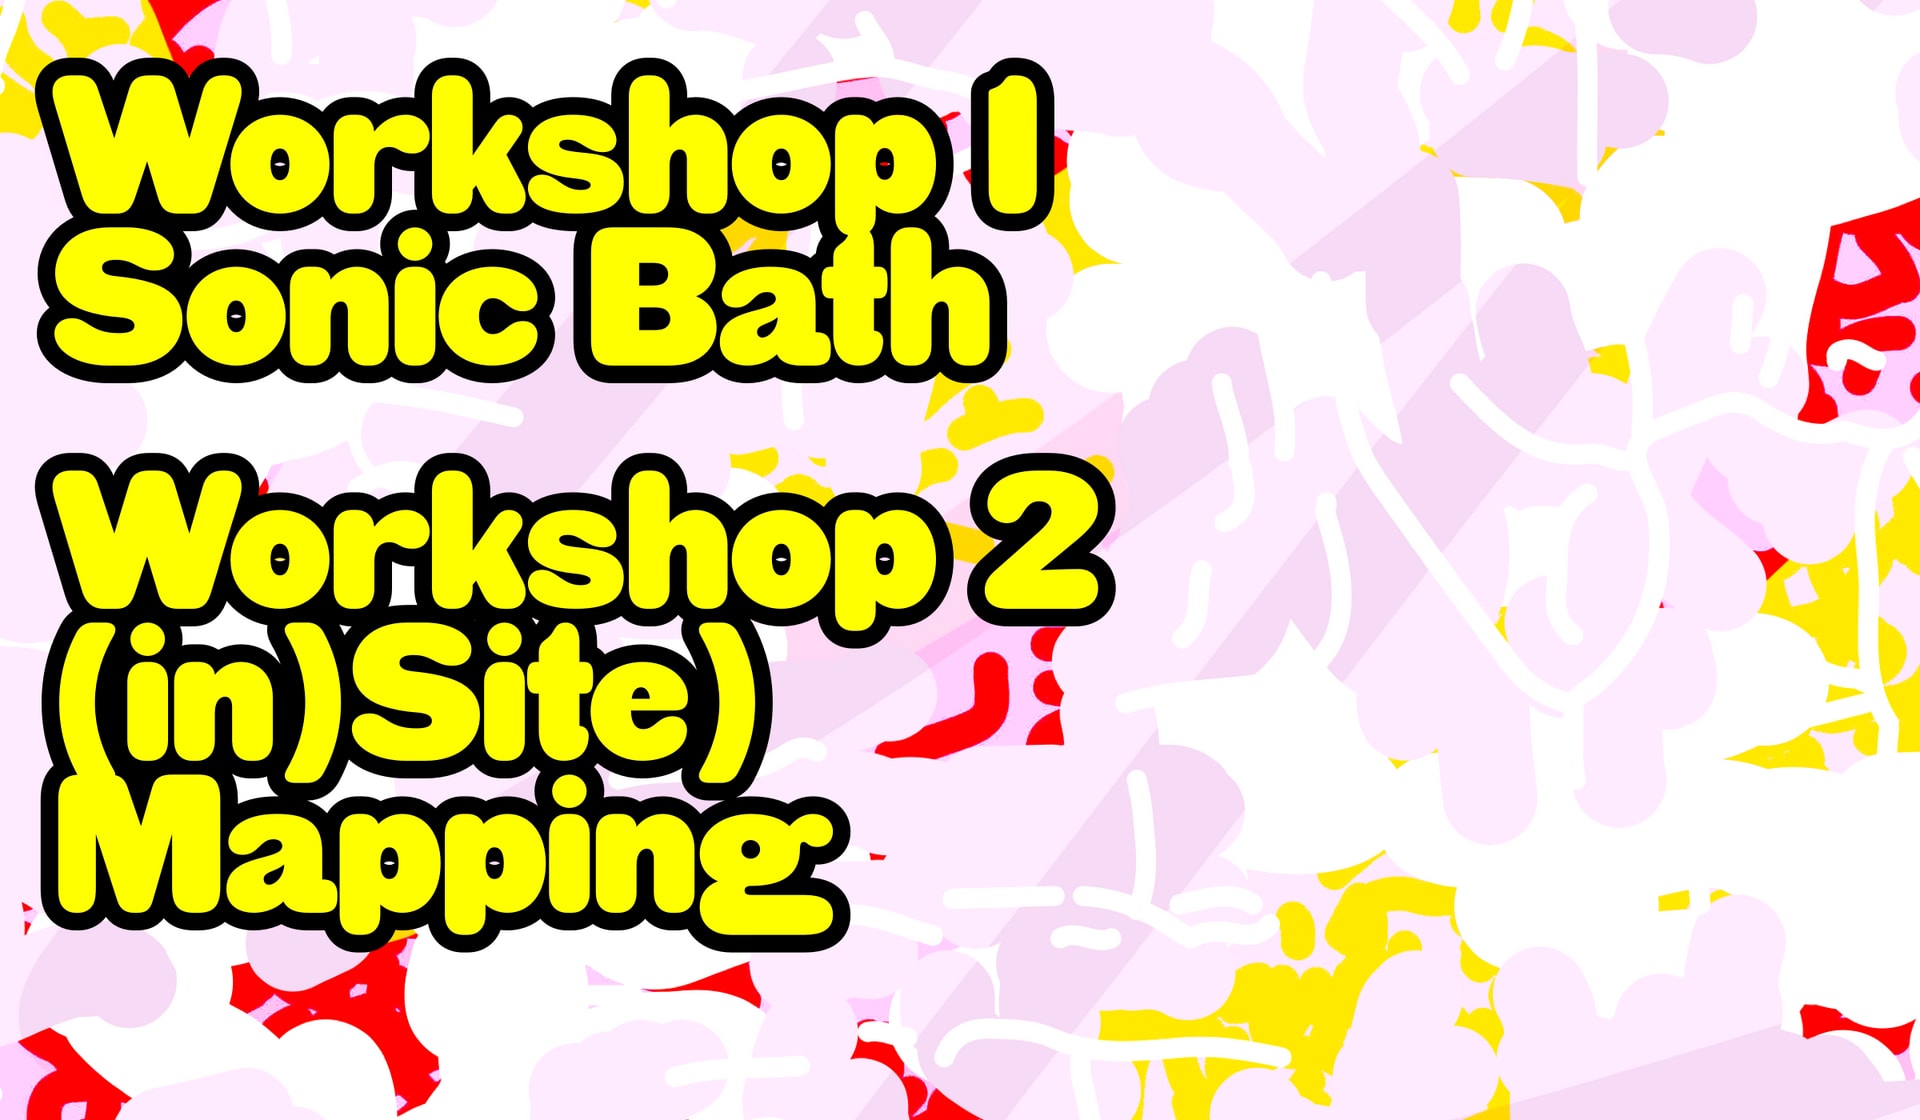  Large graphic showcasing Workshop 1: Sonic Bath and Workshop 2: in(Site) Mapping.